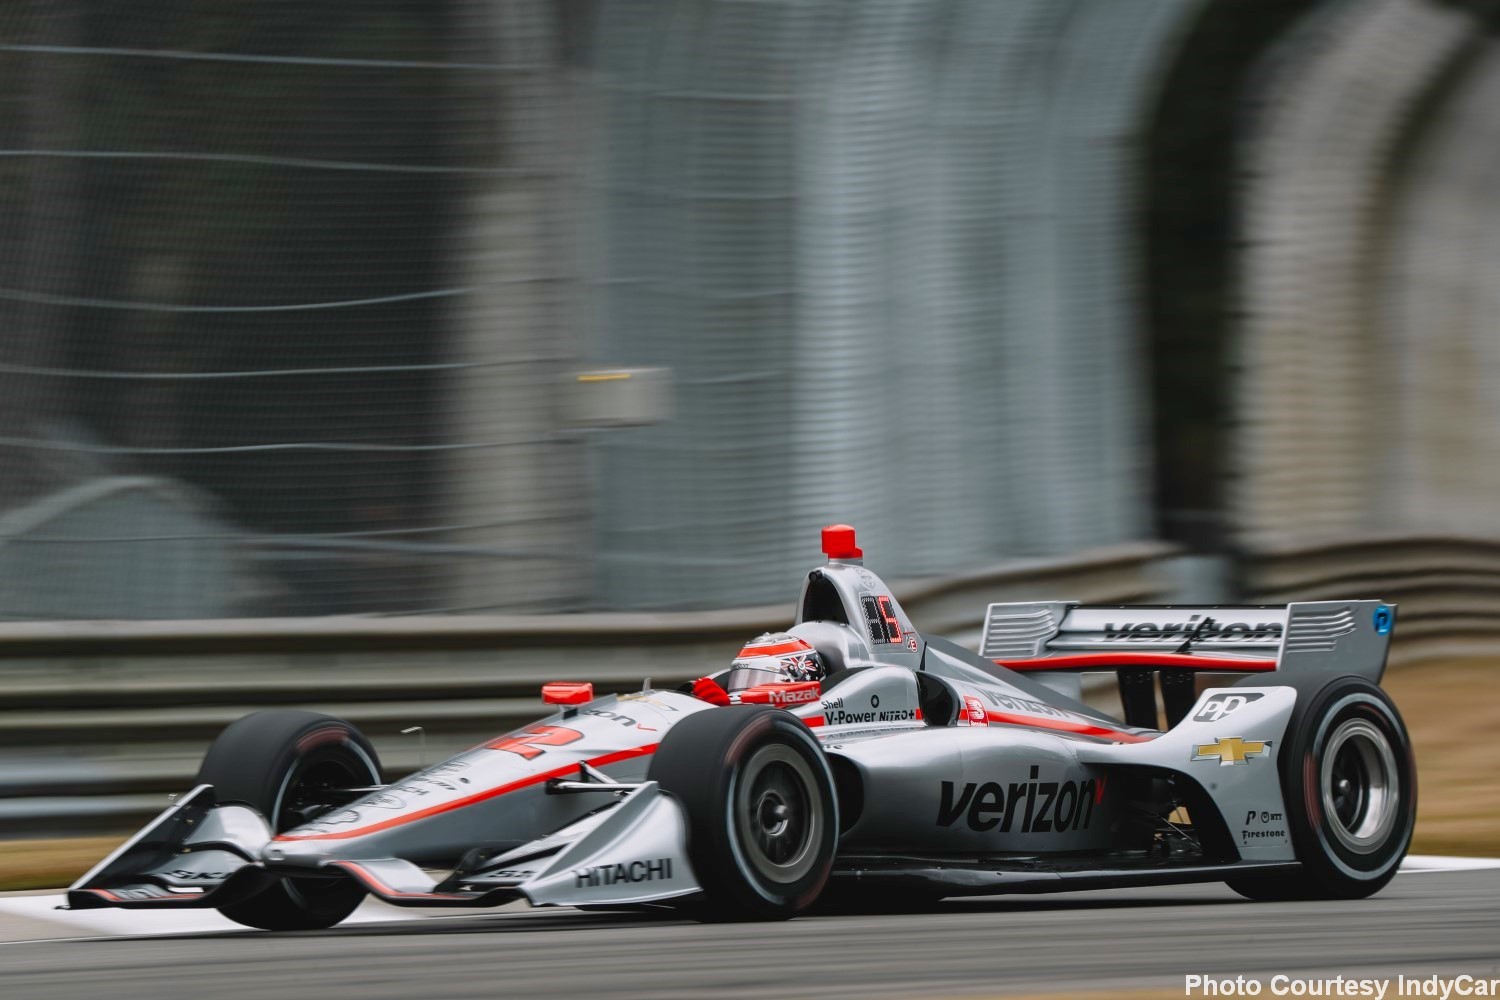 How much is Will Power and the Penske team sandbagging?